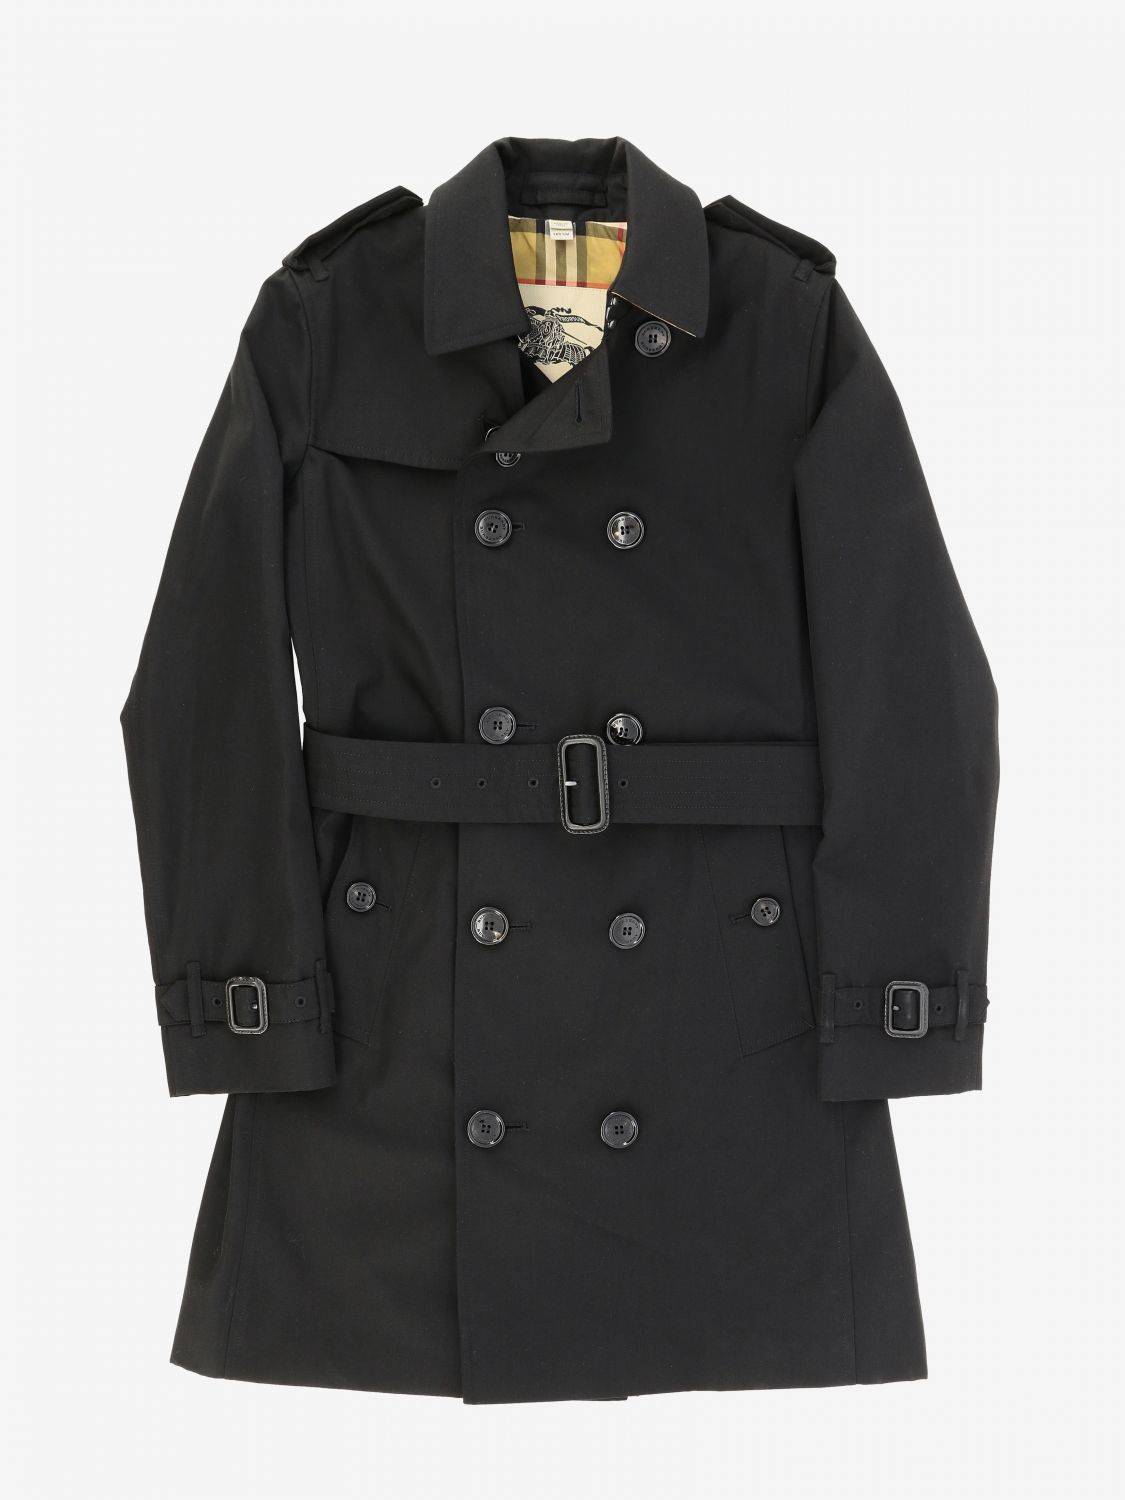 Burberry Double-breasted Trench Coat | lupon.gov.ph